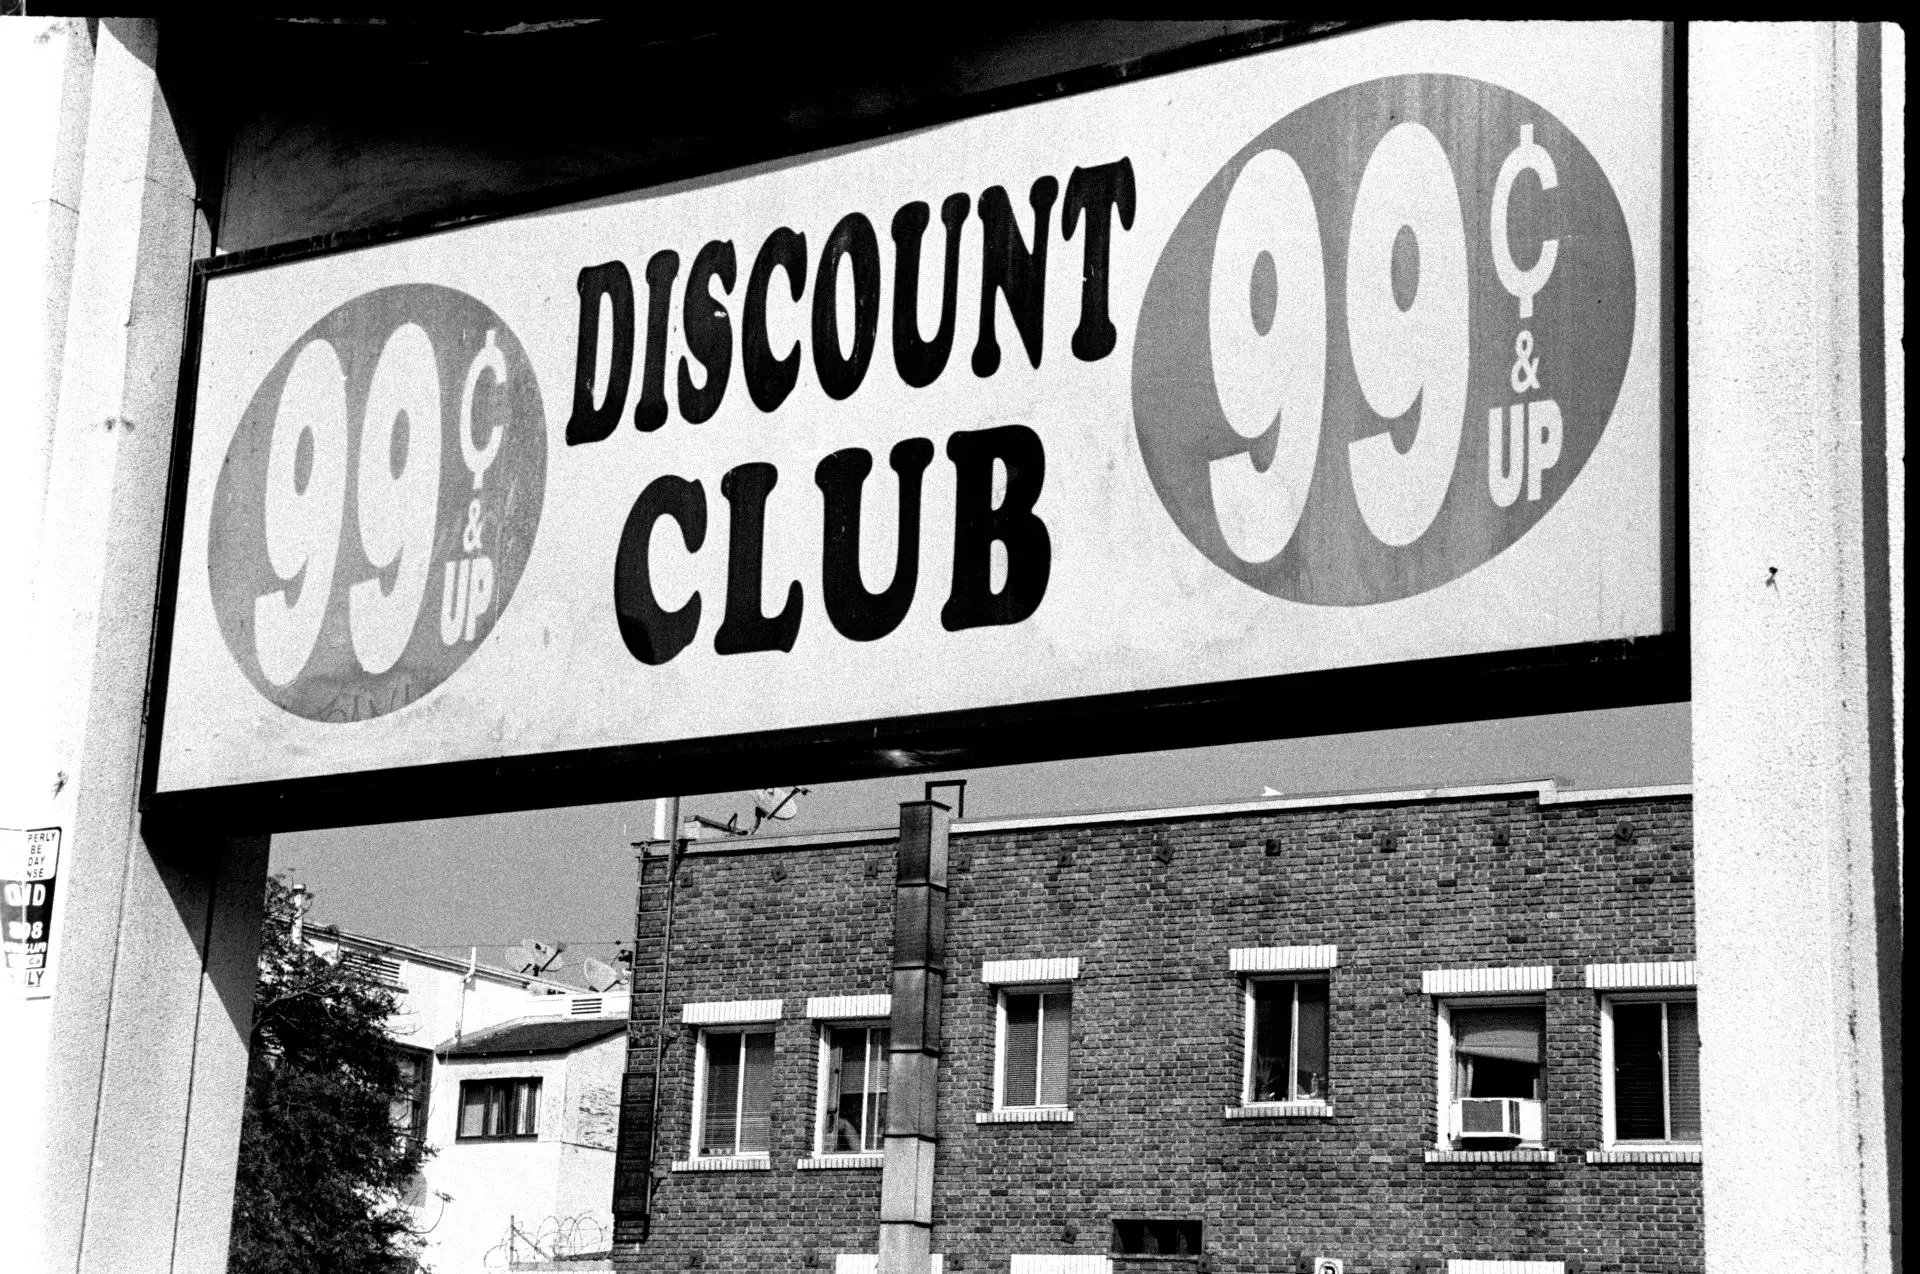 A sign reading "99 cents & up DISCOUNT CLUB", with a brick building behind it.